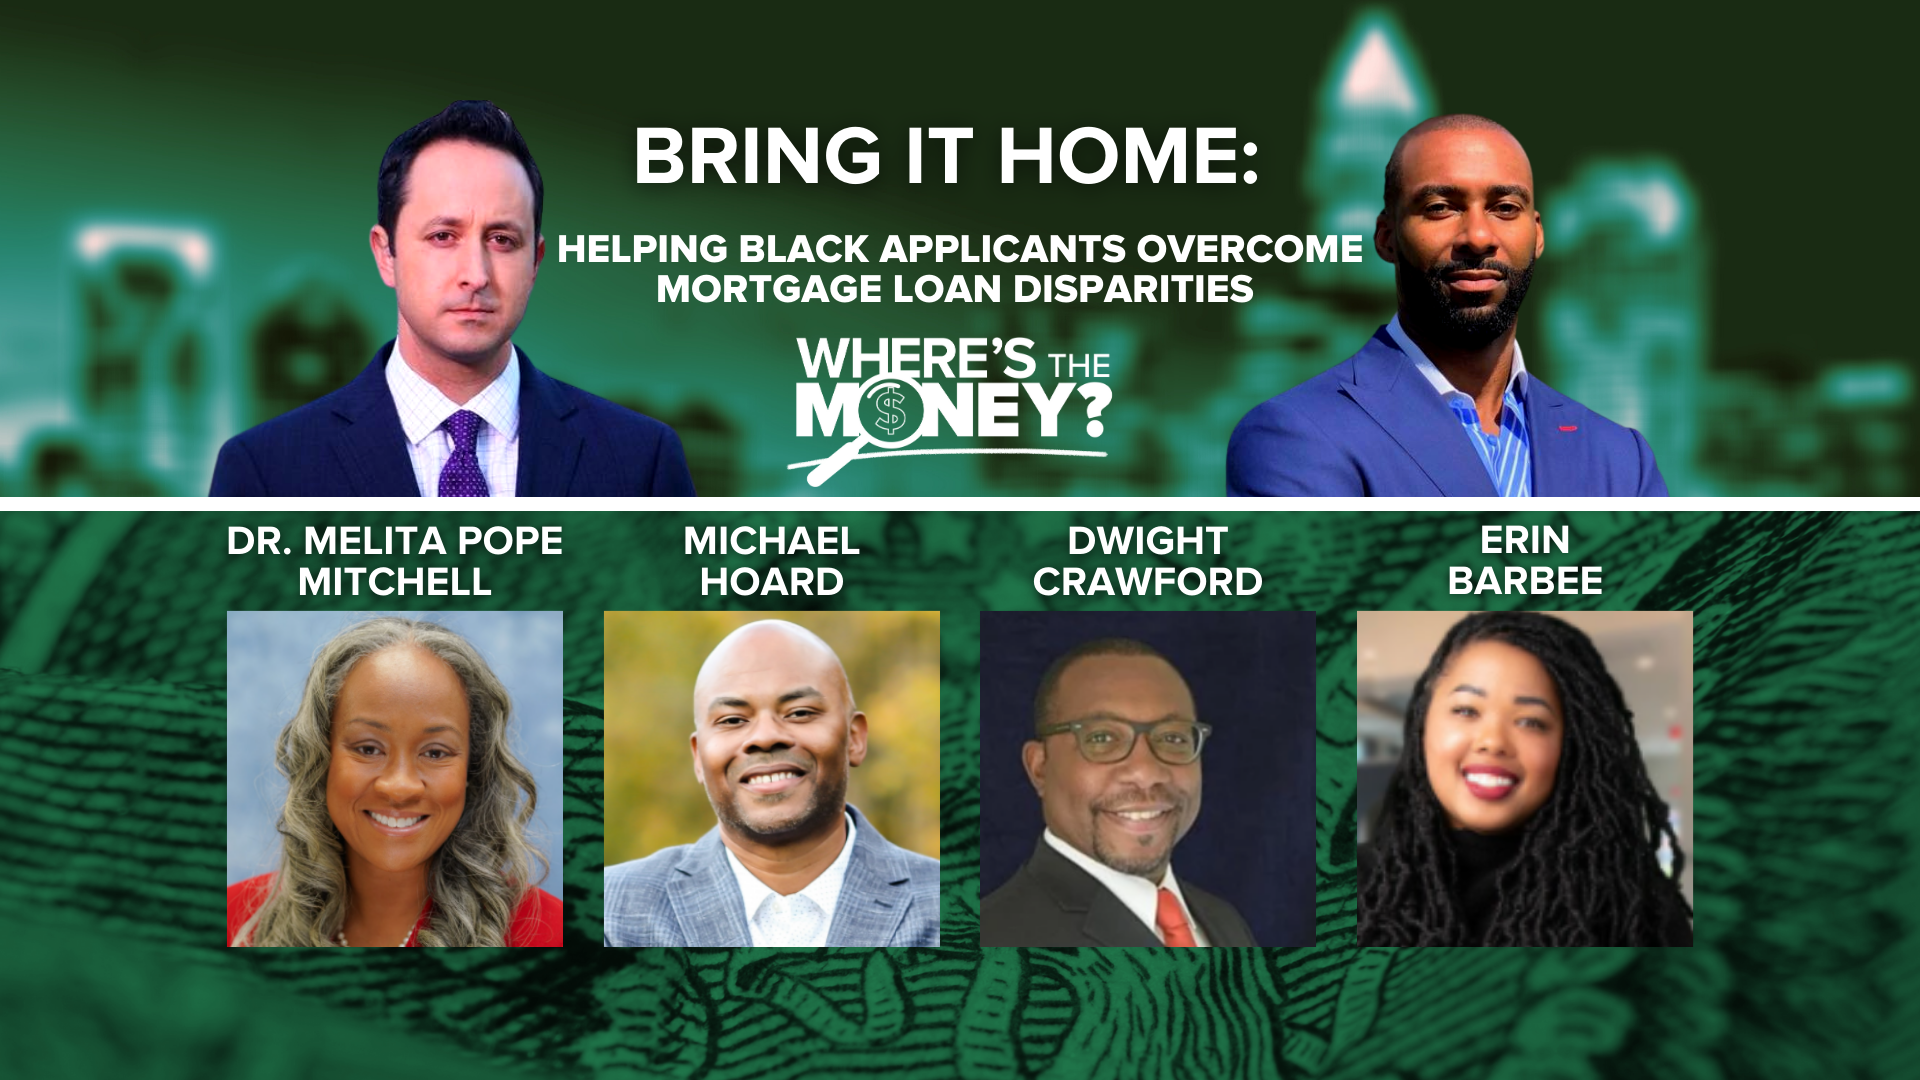 Persistent systemic challenges continue to prevent people of color from securing home loans. This virtual forum provides  community help to overcome disparities.